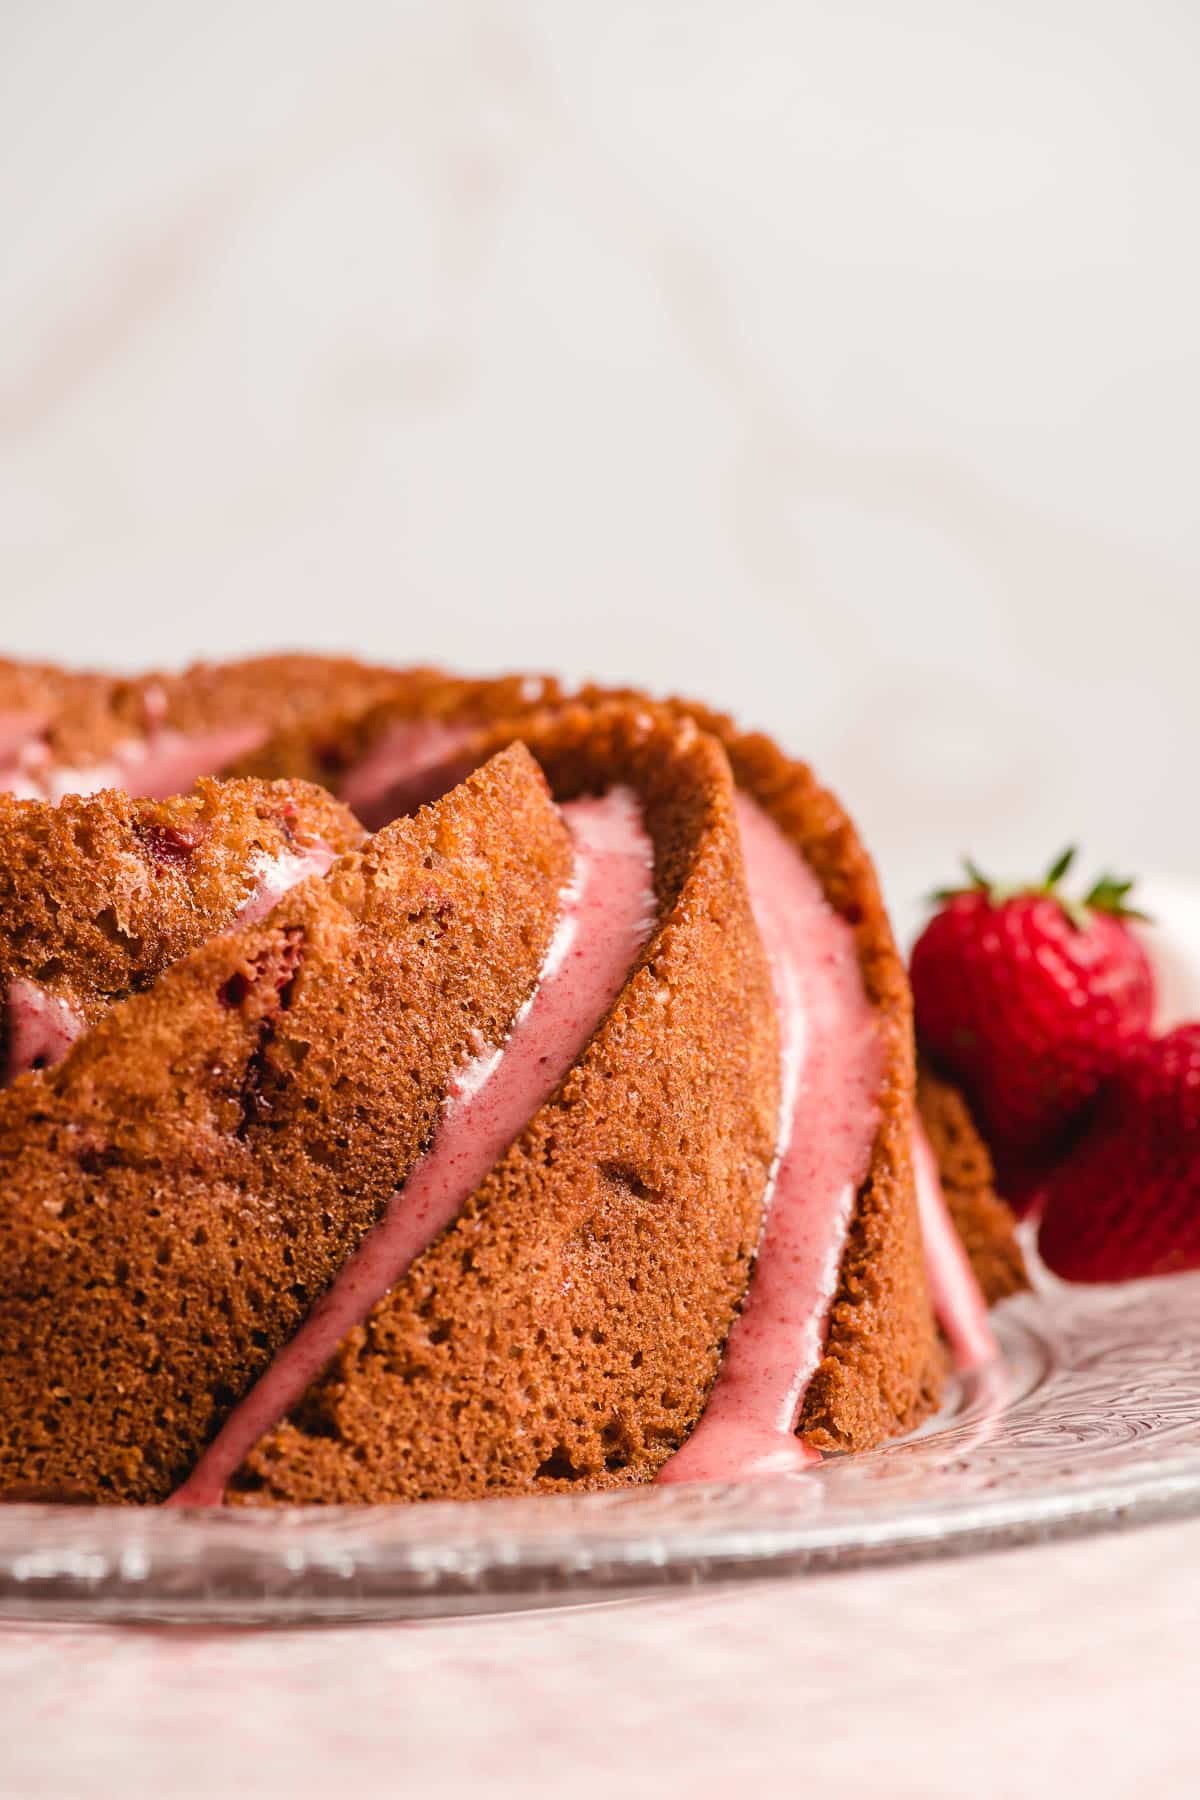 Strawberry Bundt Cake on a glass serving dish with fresh strawberries in the background.